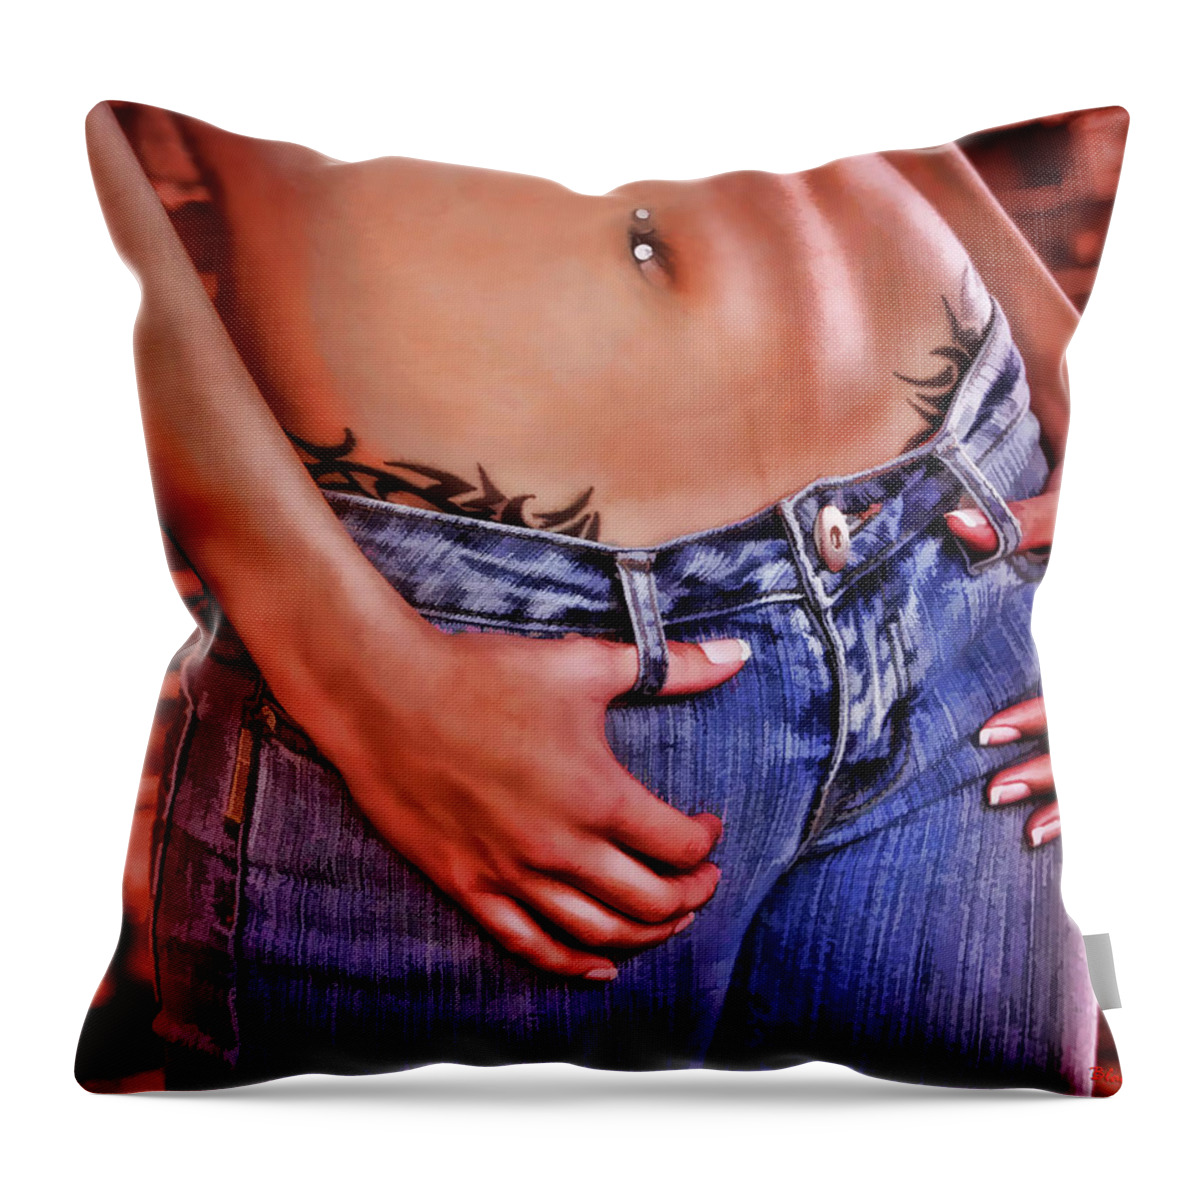  Throw Pillow featuring the photograph Stomic by Blake Richards